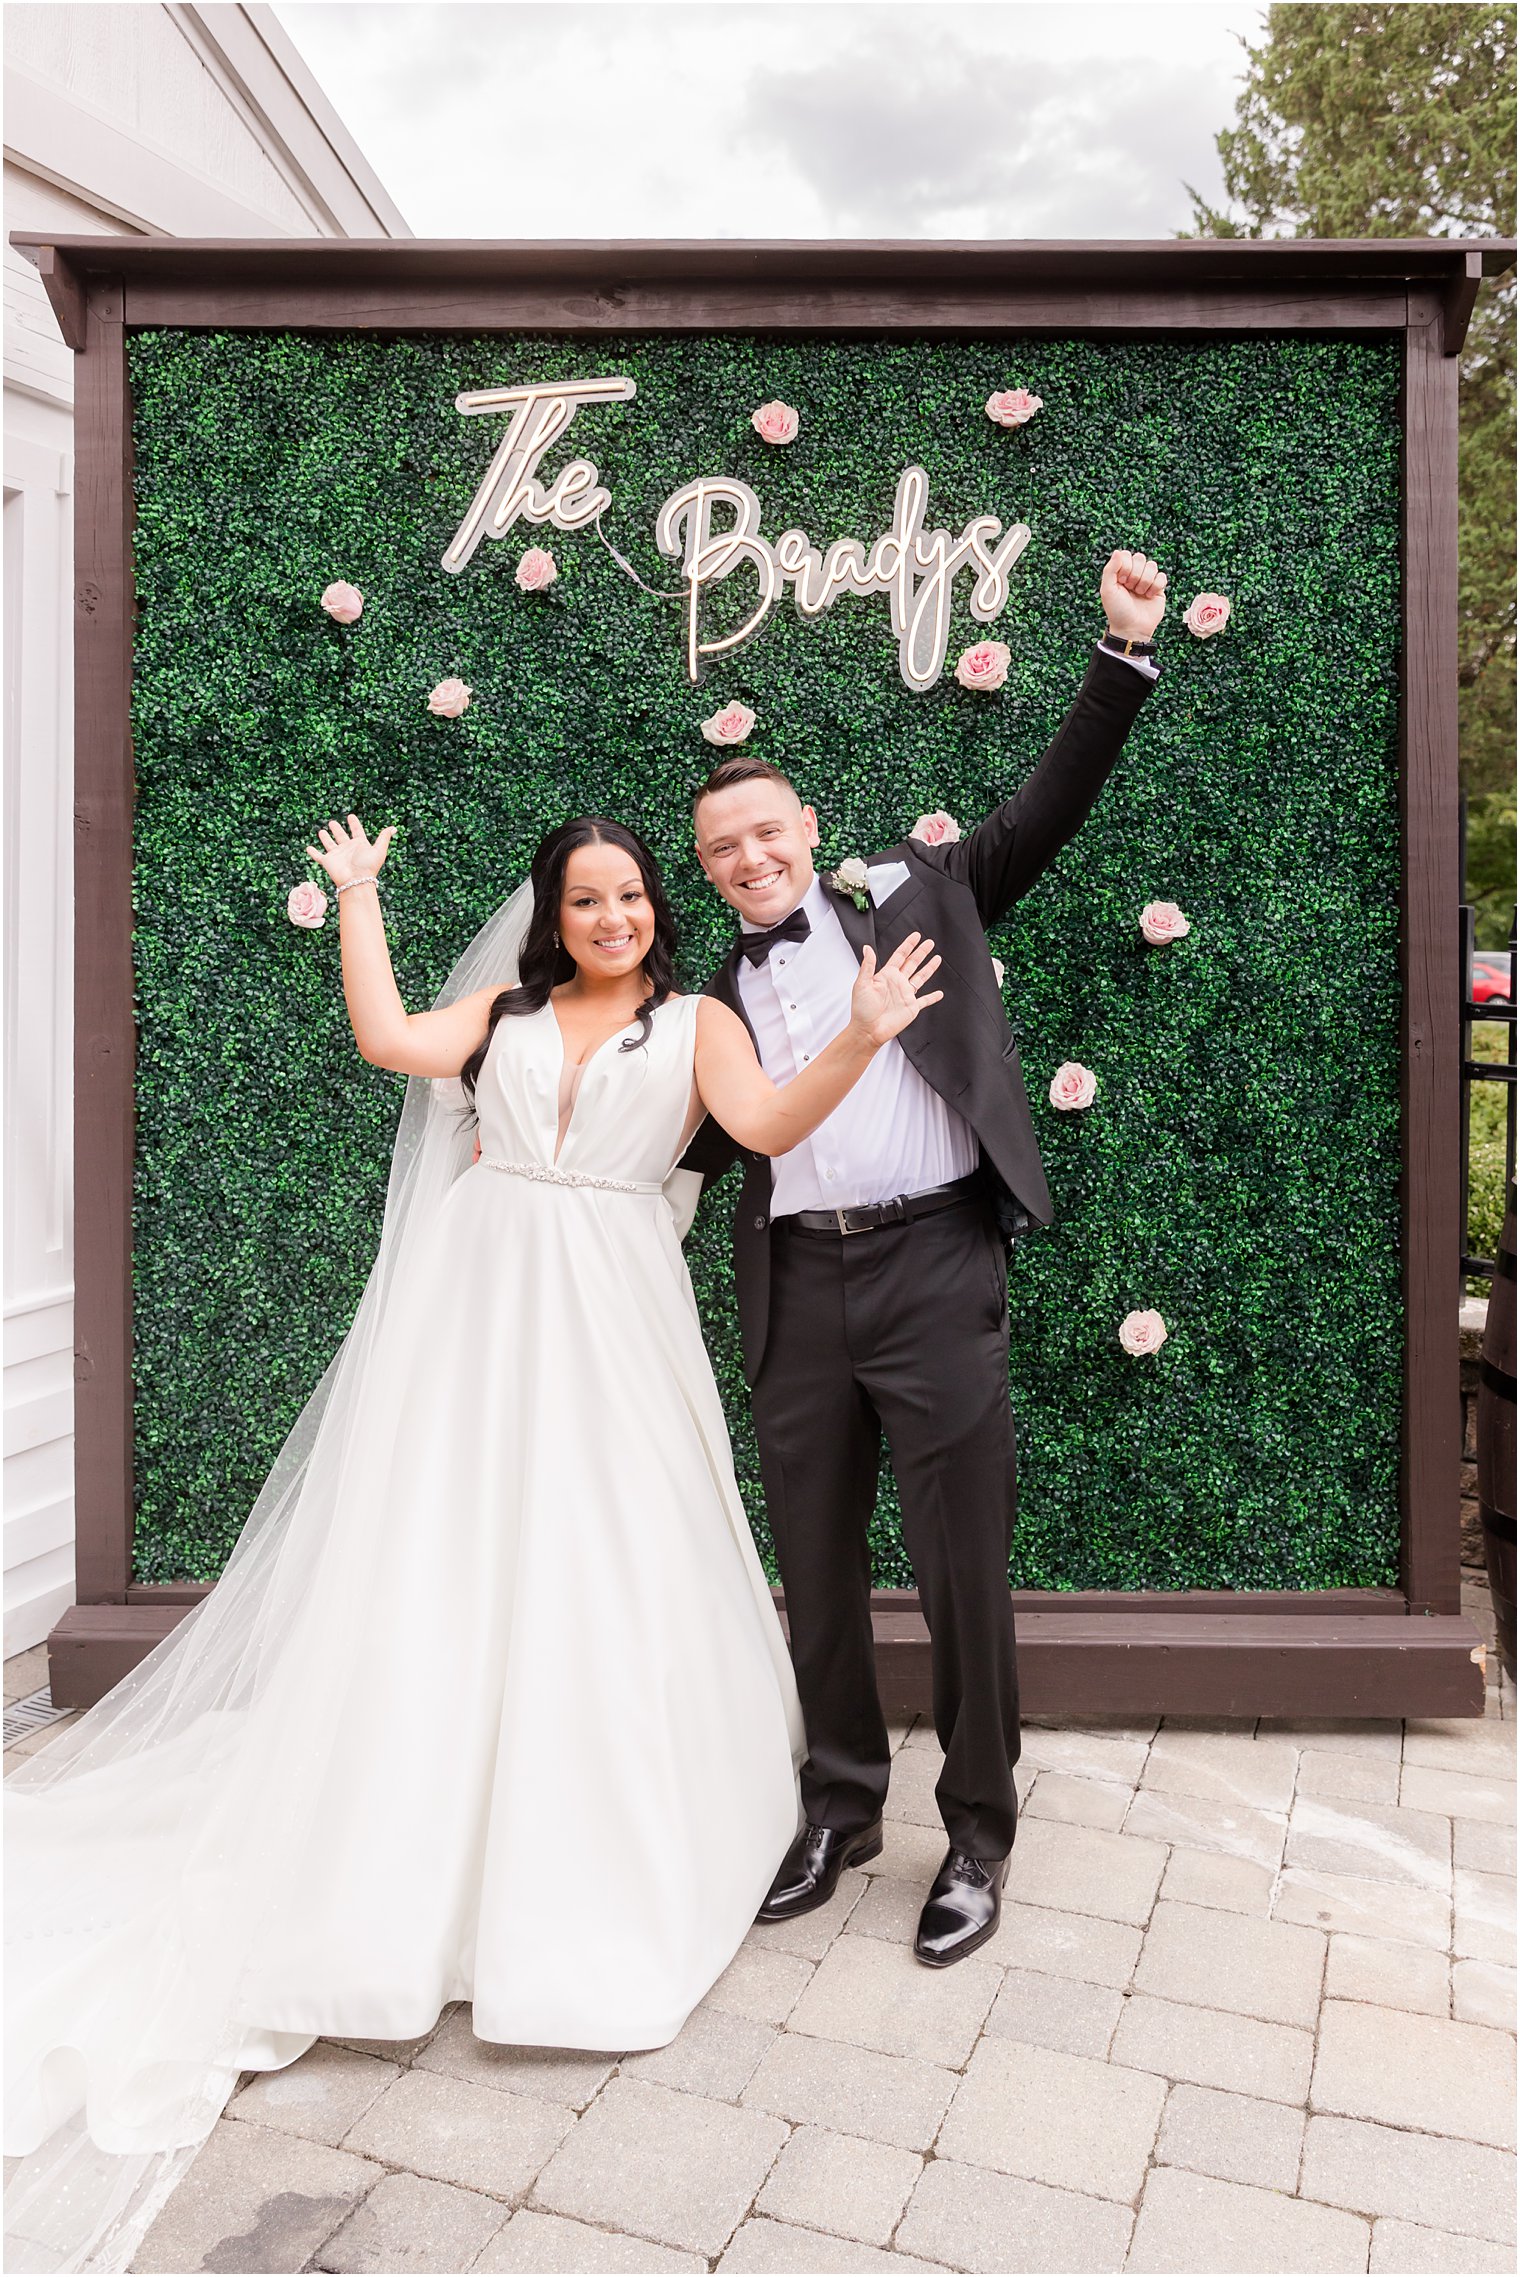 newlyweds cheer by custom sign at reception 